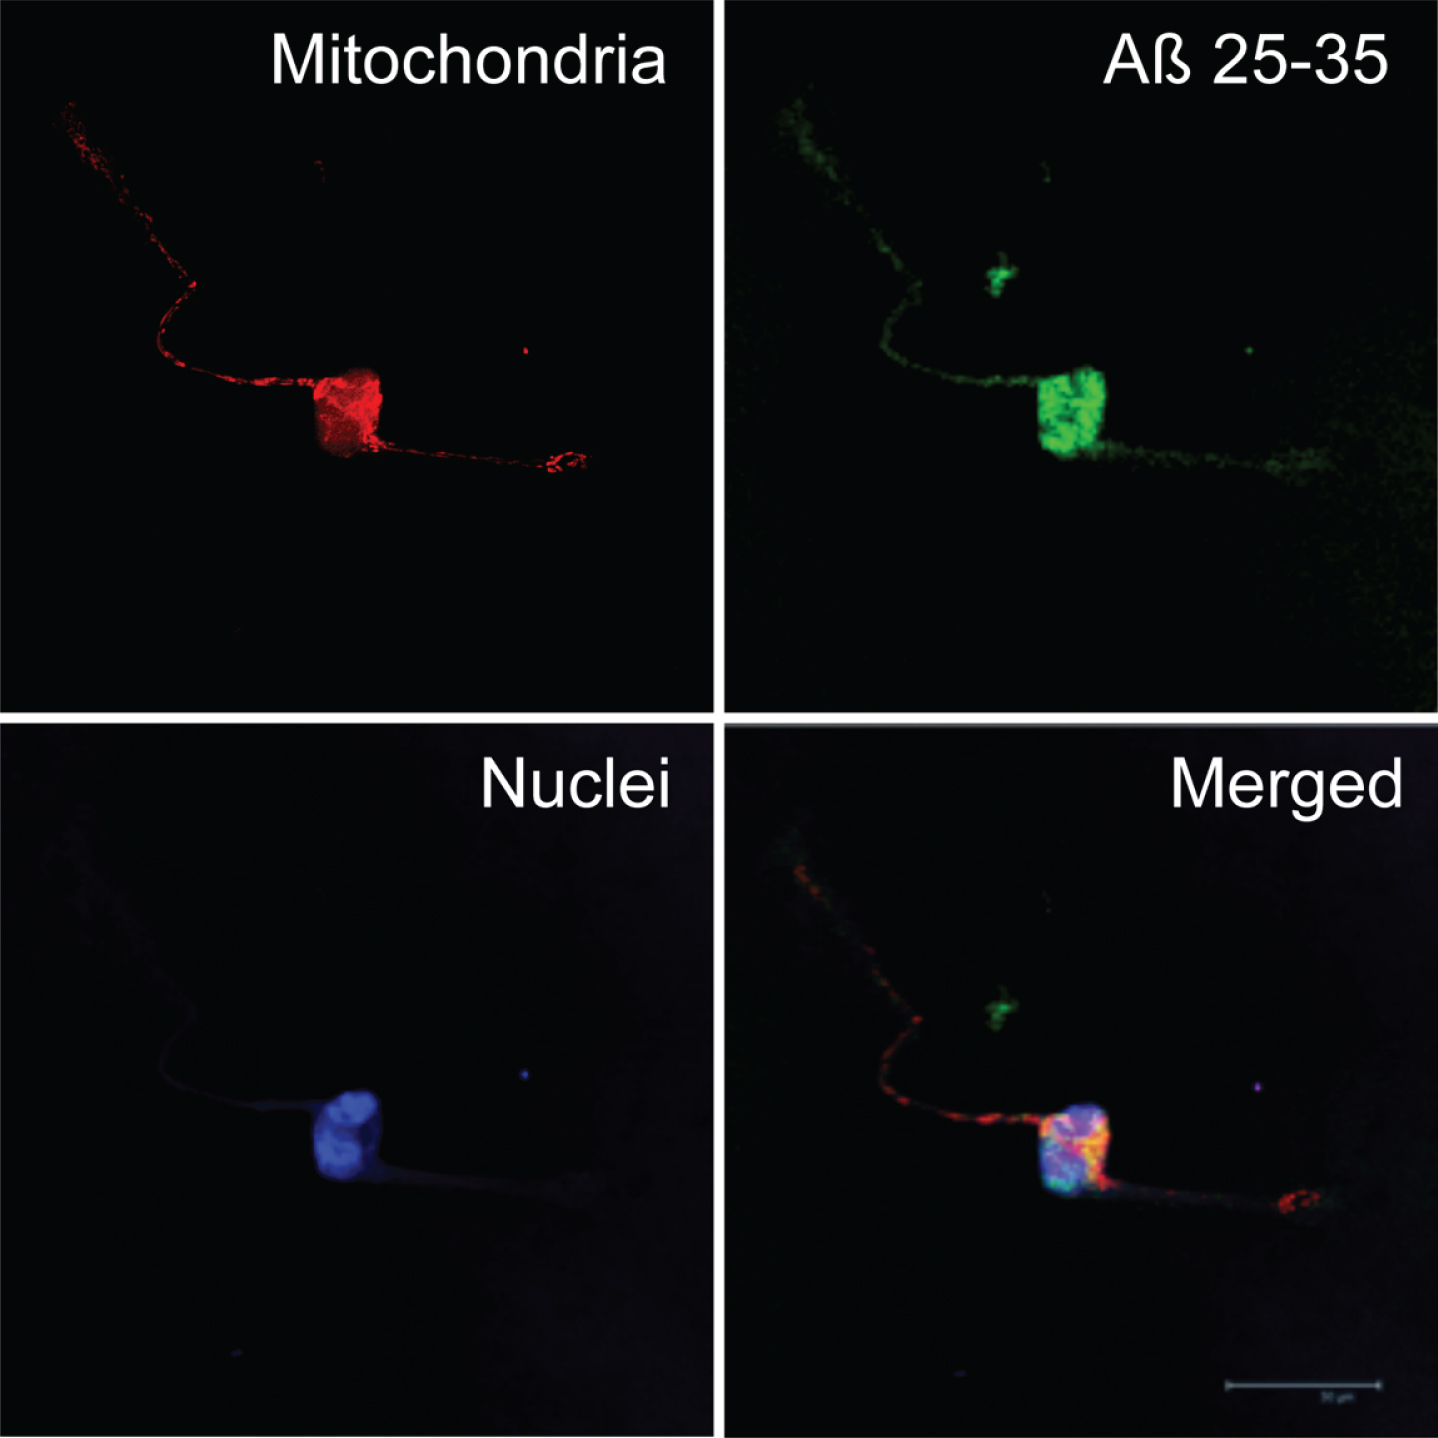 Subcellular localization of amyloid-beta25-35 (Aβ25-35). Neurons in primary culture (3 DIV) were incubated for 24 h in Hanks medium in the presence of Aβ25-35 (30 μM). After incubation, mitochondria were stained with MitotrackerRed (in red), and cells were fixed. Immunocytochemistry against Aβ25-35 was performed (in green) and nuclei were stained with TOPRO (in blue). Images were taken using confocal microscopy. Scale bar: 30 μm.